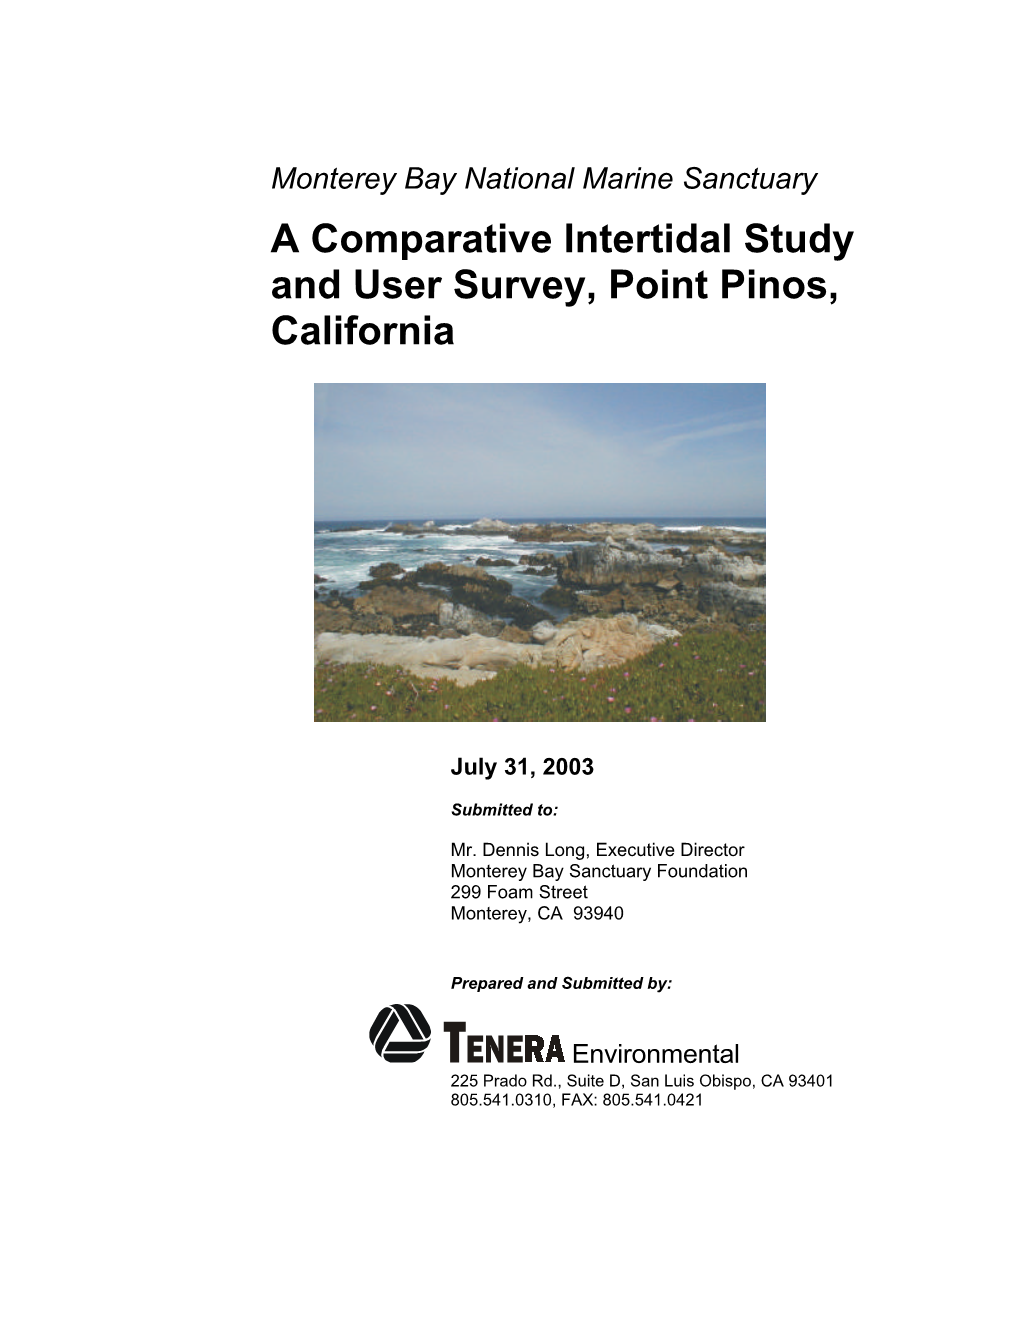 A Comparative Intertidal Study and User Survey, Point Pinos, California